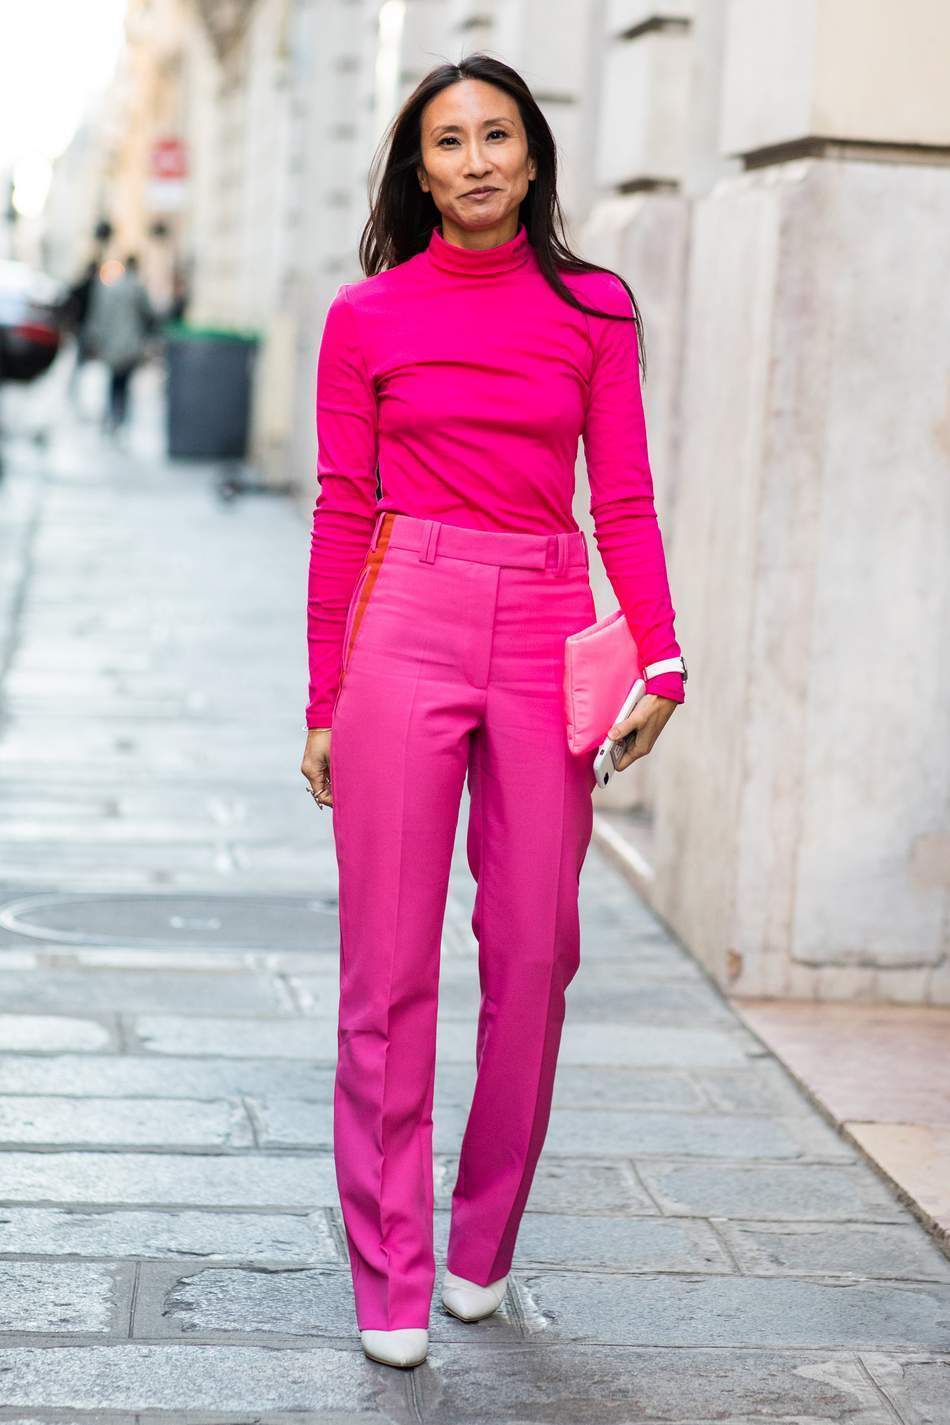 How To Wear Pink | Colourful outfits, Pink pants outfit, Fashion